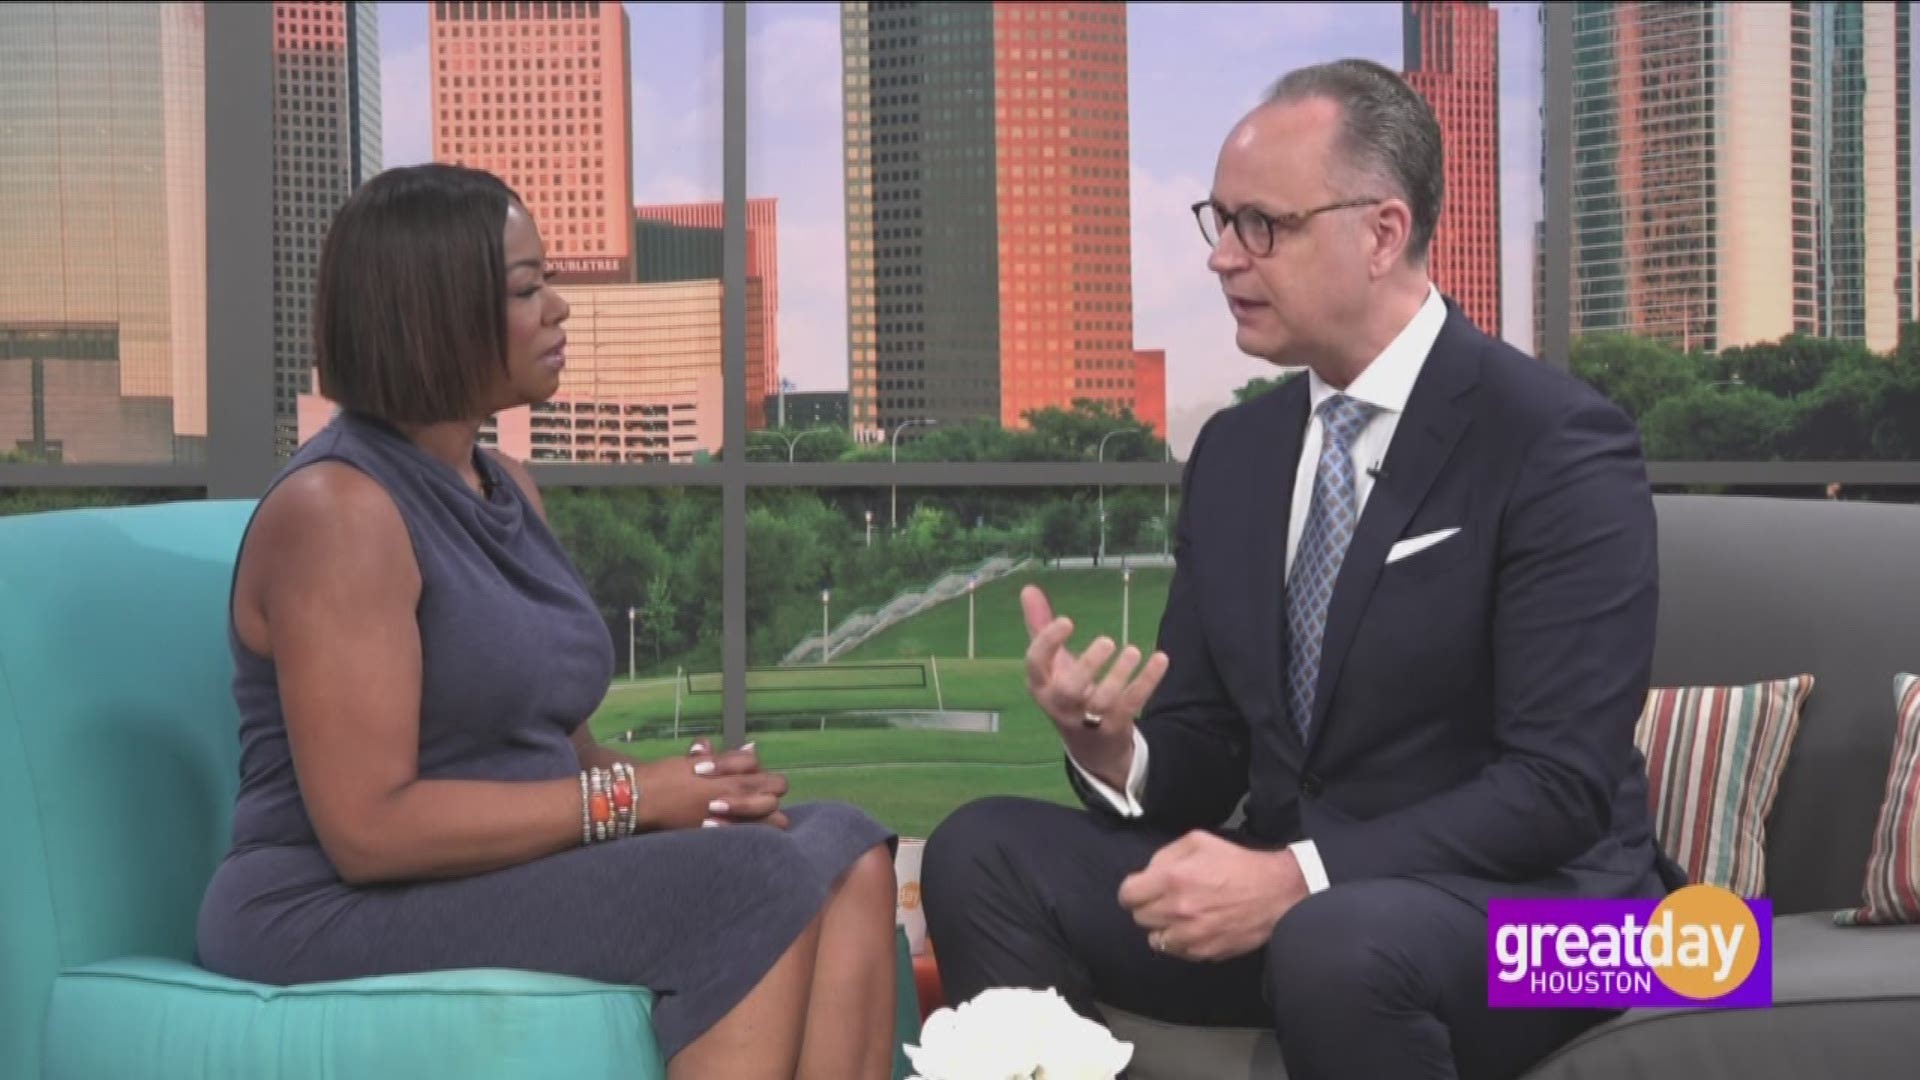 Robert Hendriks, spokesman for the Jehovah's Witnesses explains their religion and discusses an upcoming convention in Houston.